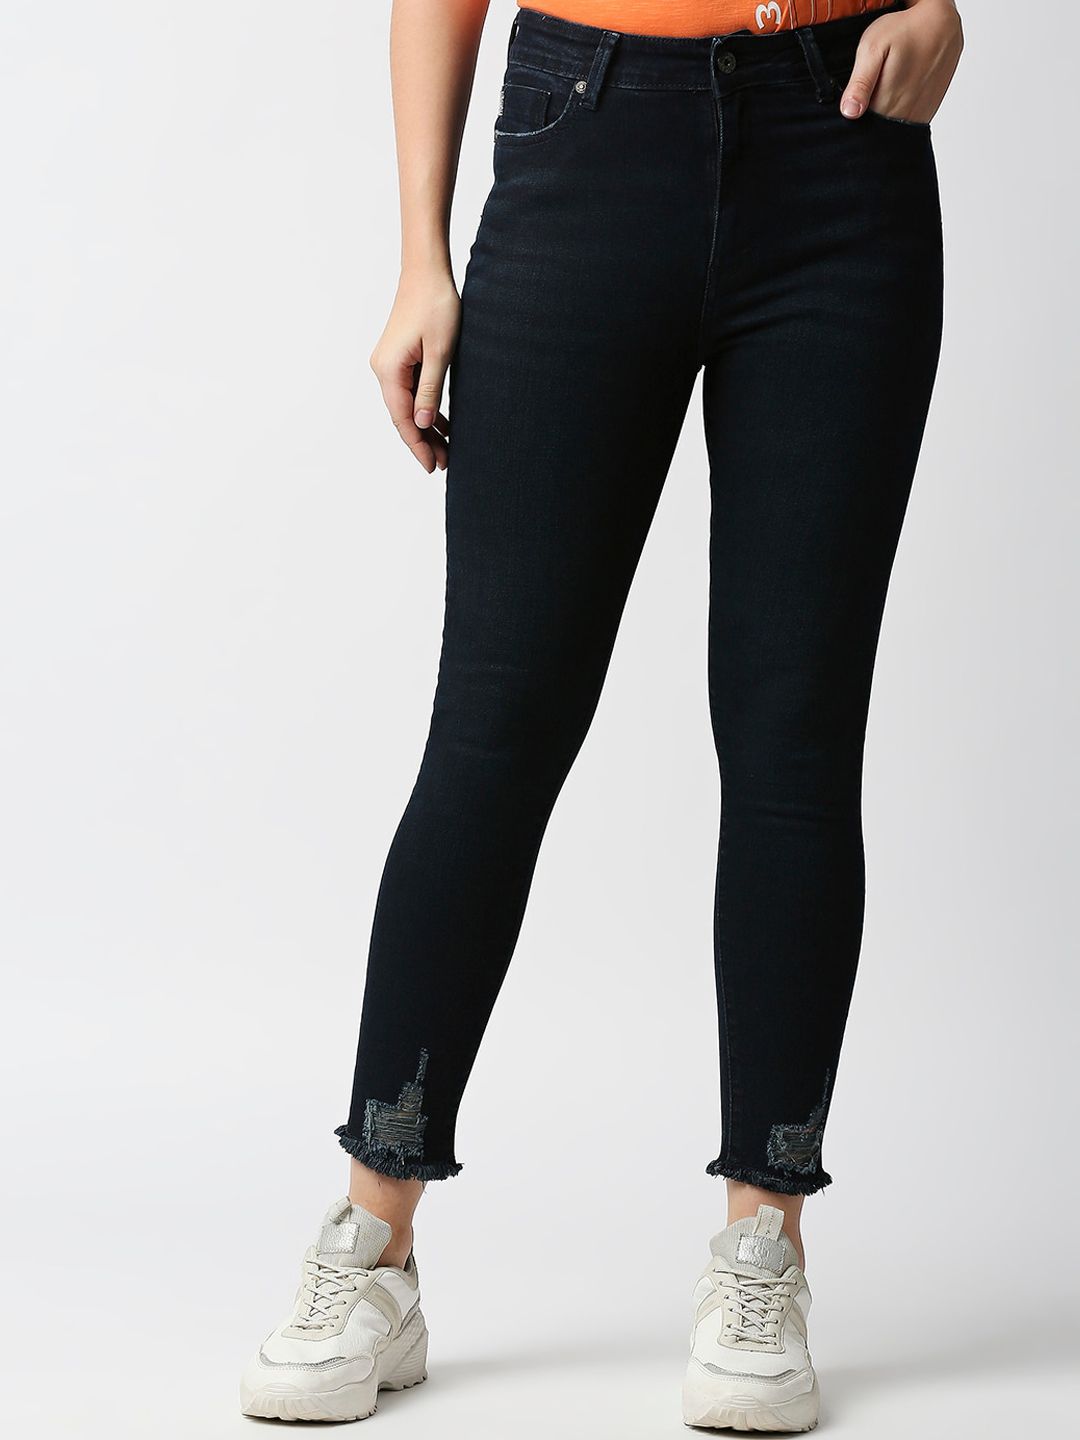 Pepe Jeans Women Blue Skinny Fit High-Rise Jeans Price in India